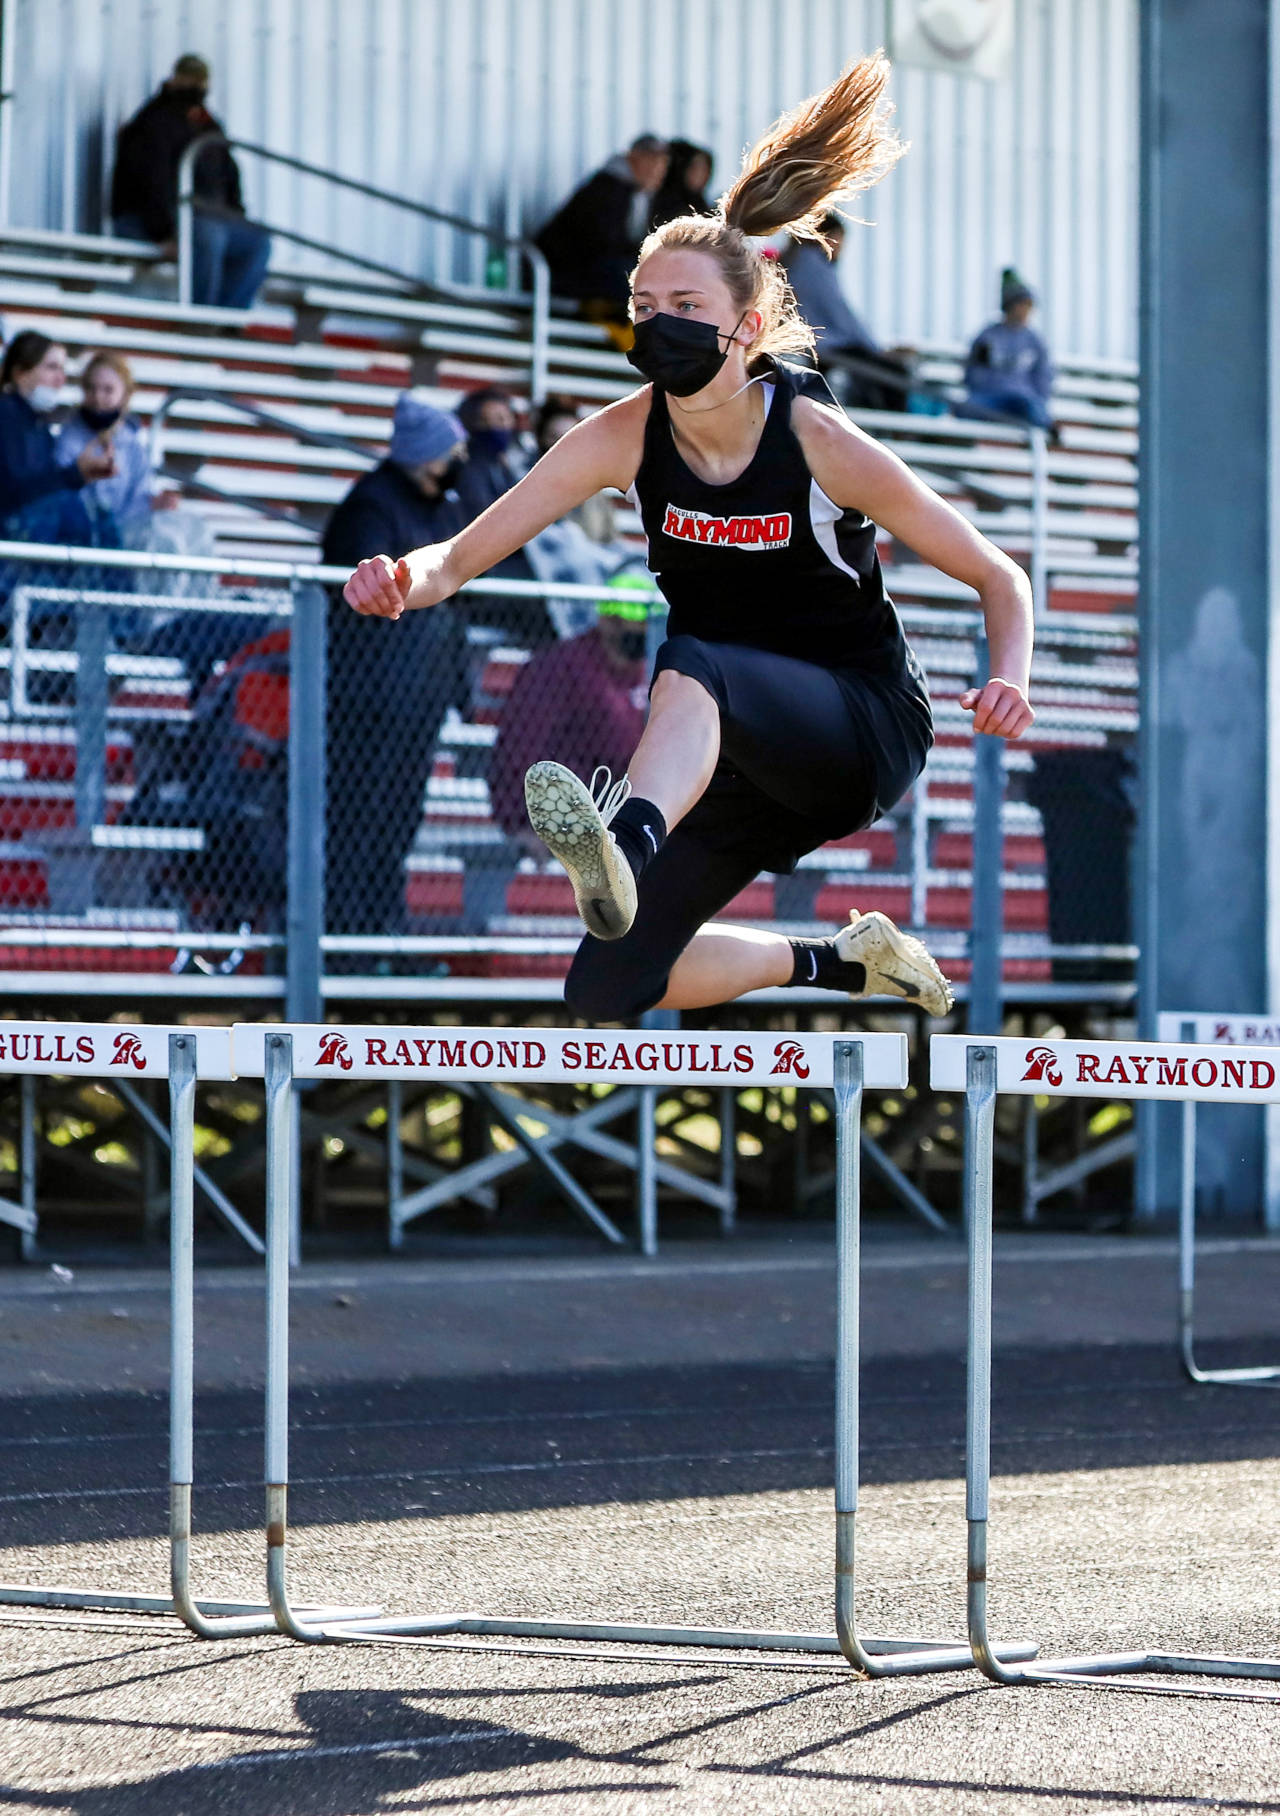 PHOTO BY LARRY BALE Raymond’s Kyra Gardner, seen here in a file photo, won the 100-meter hurdles, the long jump, high jump and triple jump at the 2B District 4 Championships on Thursday at Rainier High School.